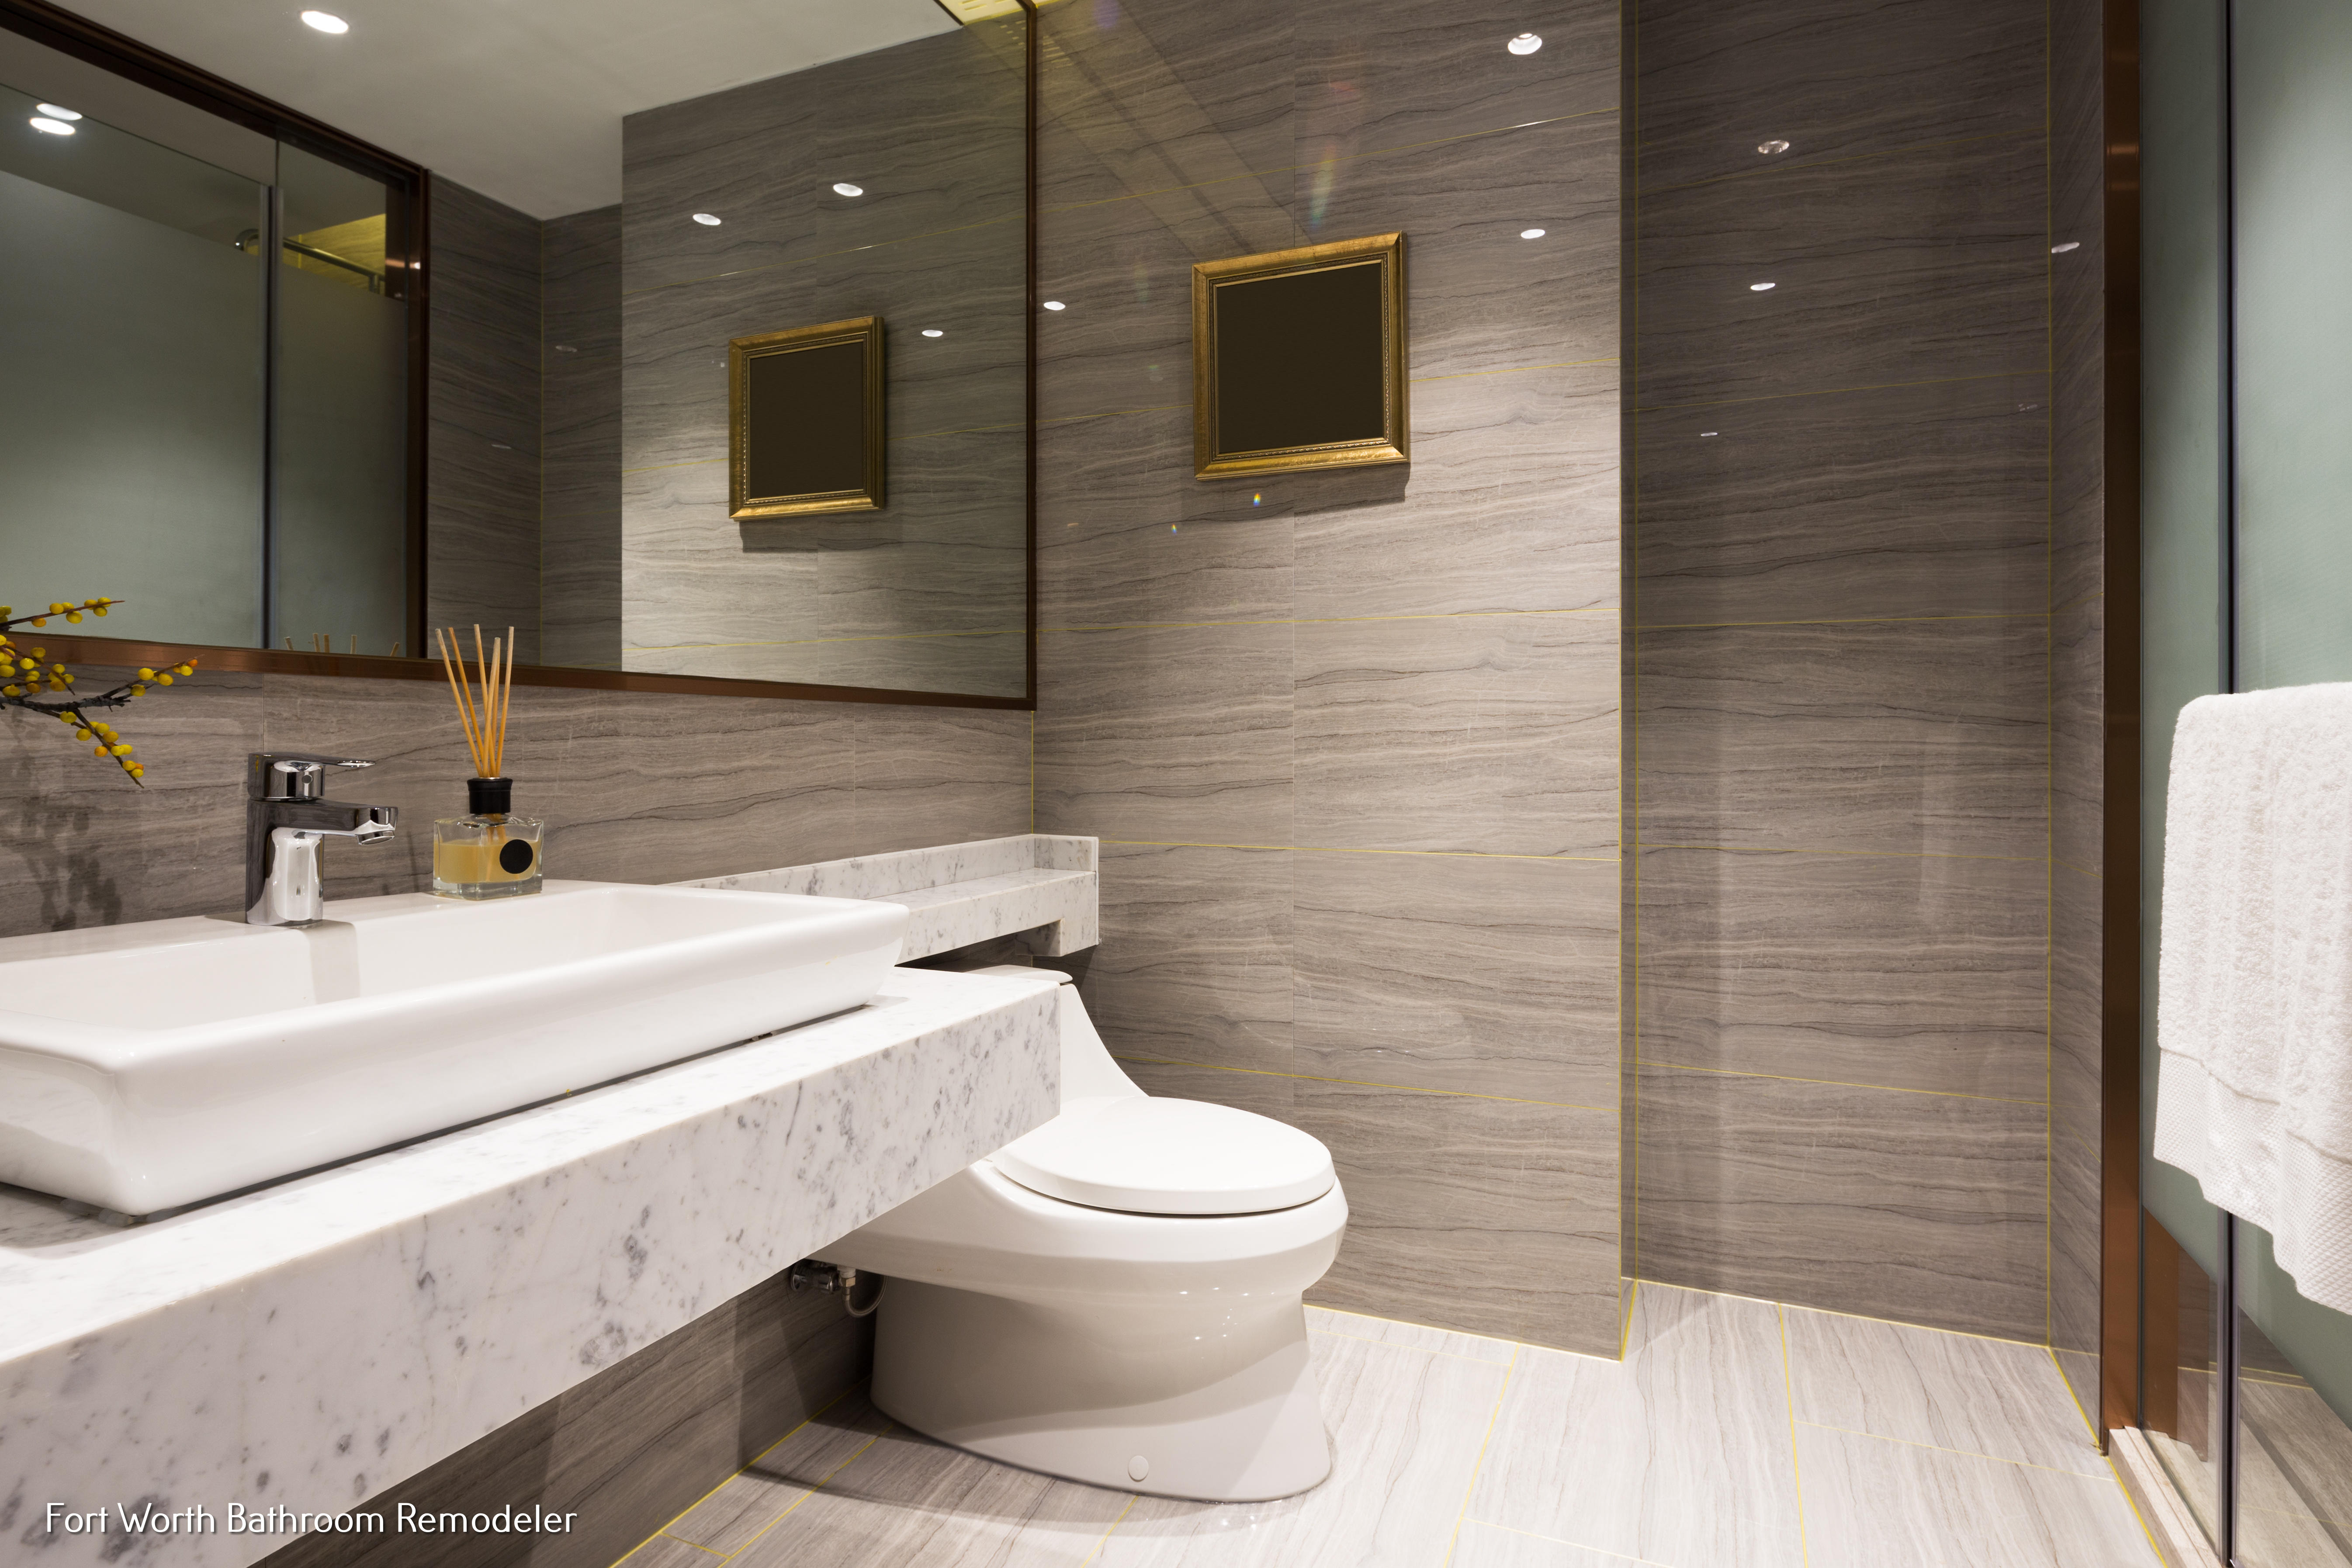 Hallmark Improvements Explains Why Homeowners Should Work with Experts for Bathroom Projects